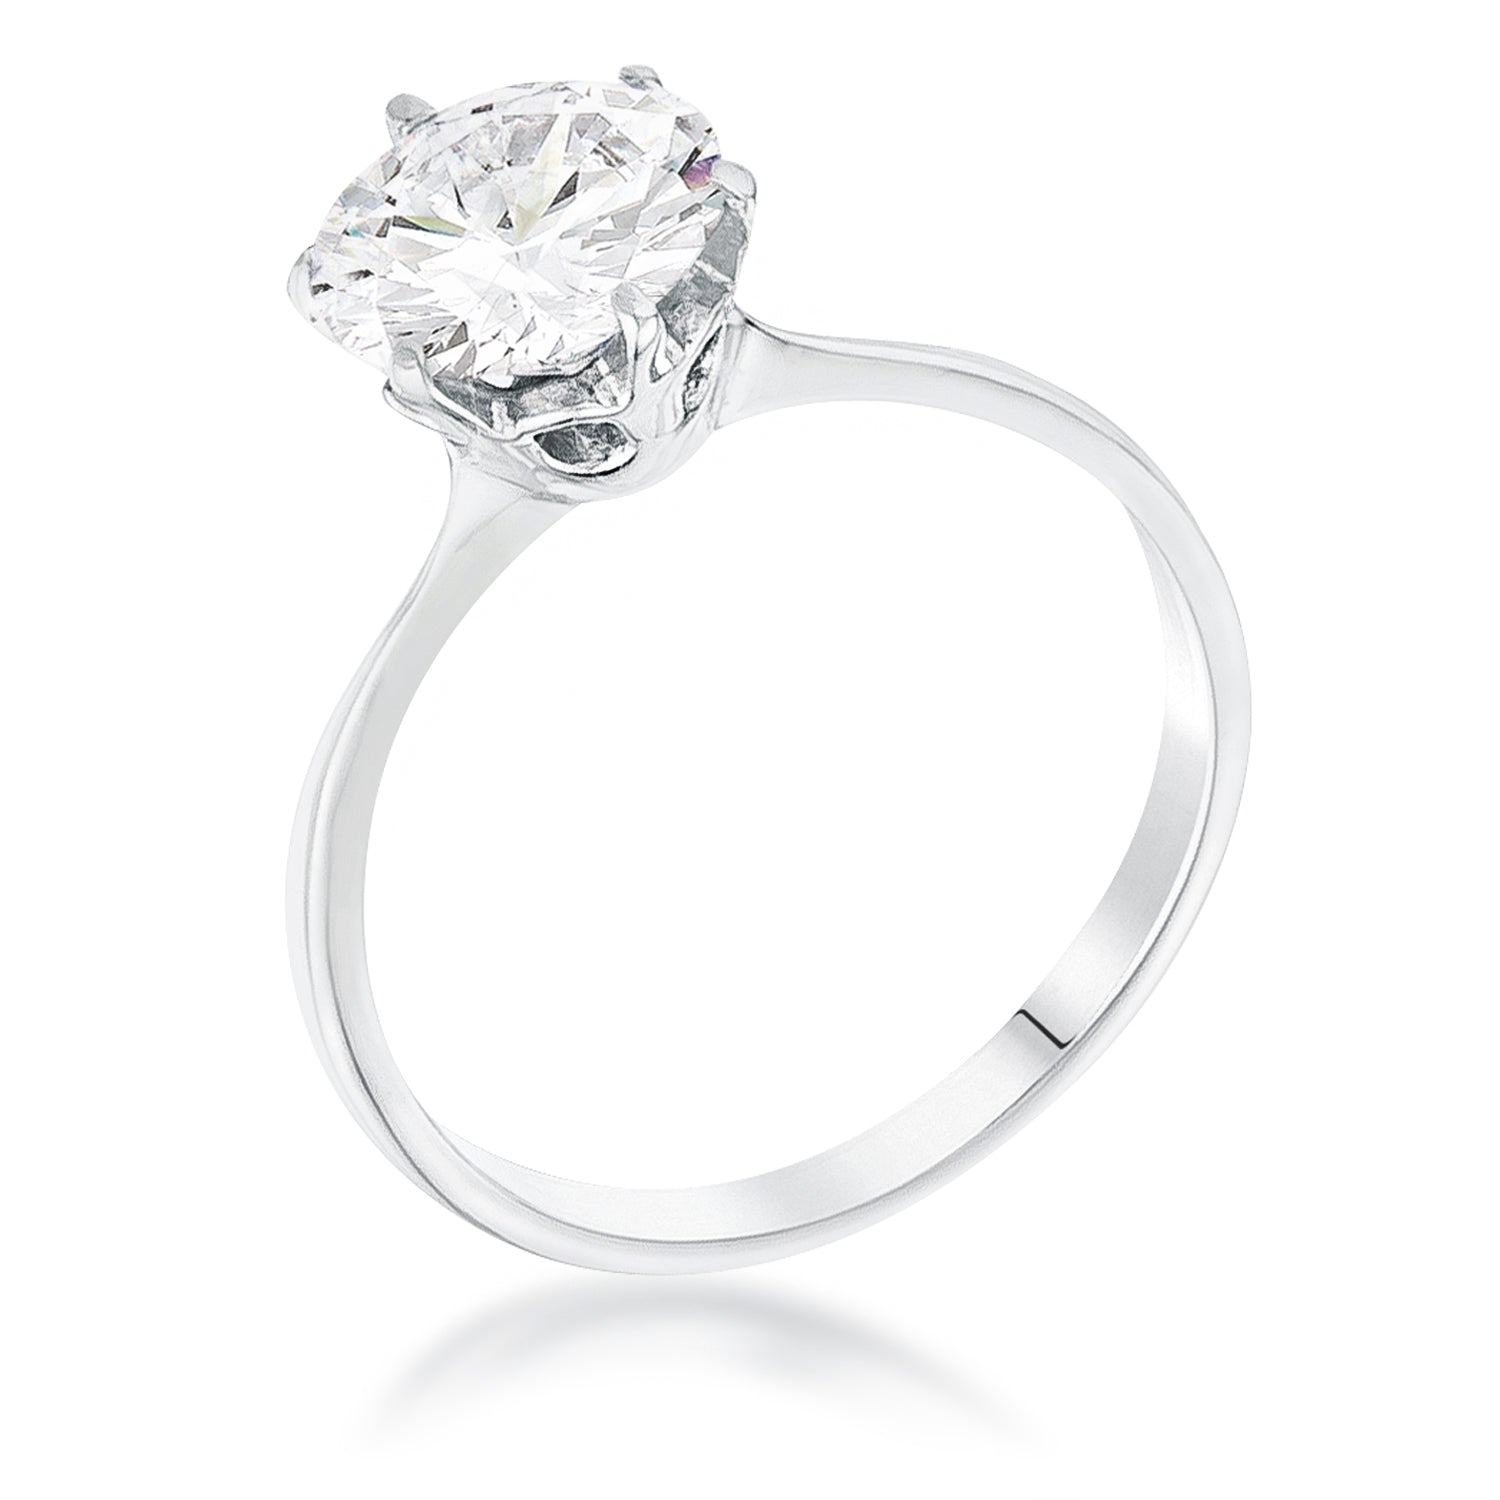 Single Solitaire Real 925 Silver 5ct Diamond Ring - $41 (78% Off Retail)  New With Tags - From Beauty